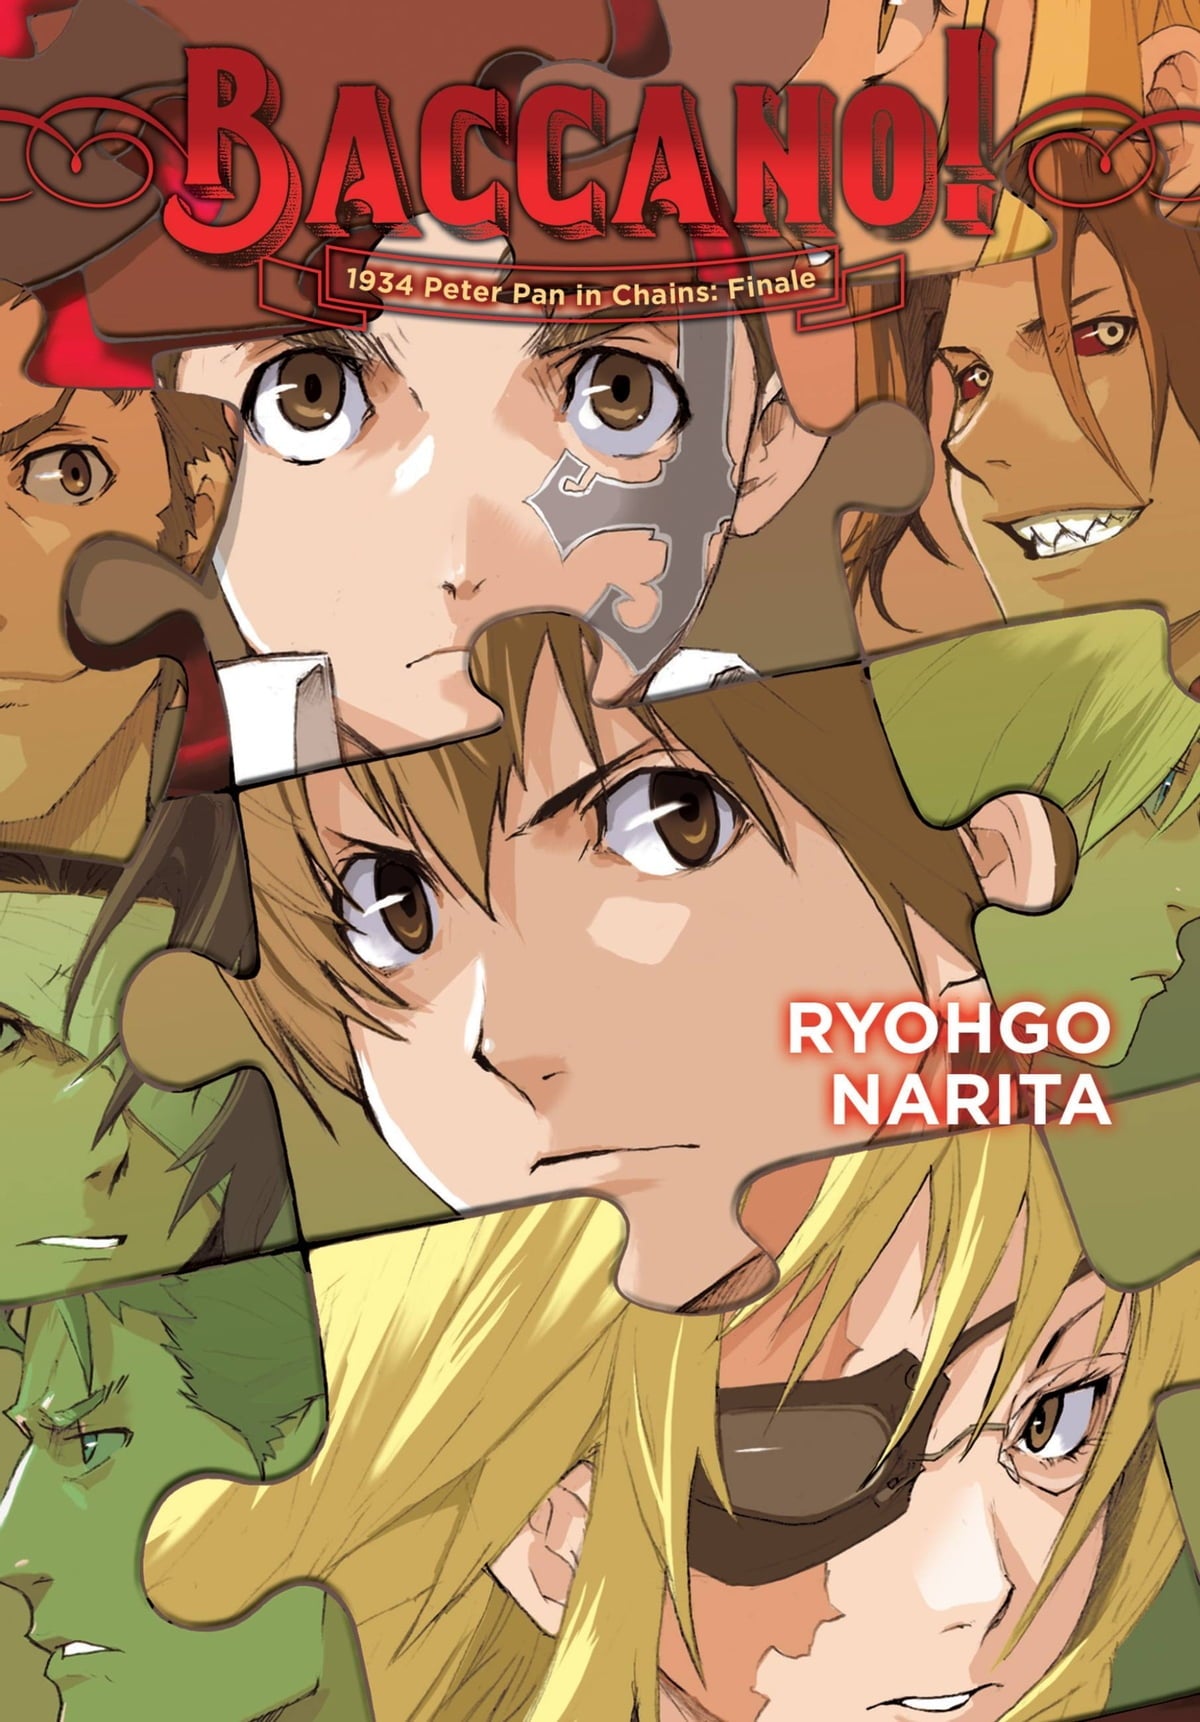 Baccano! Vol. 10 (Light Novel): 1934 Peter Pan in Chains: Finale